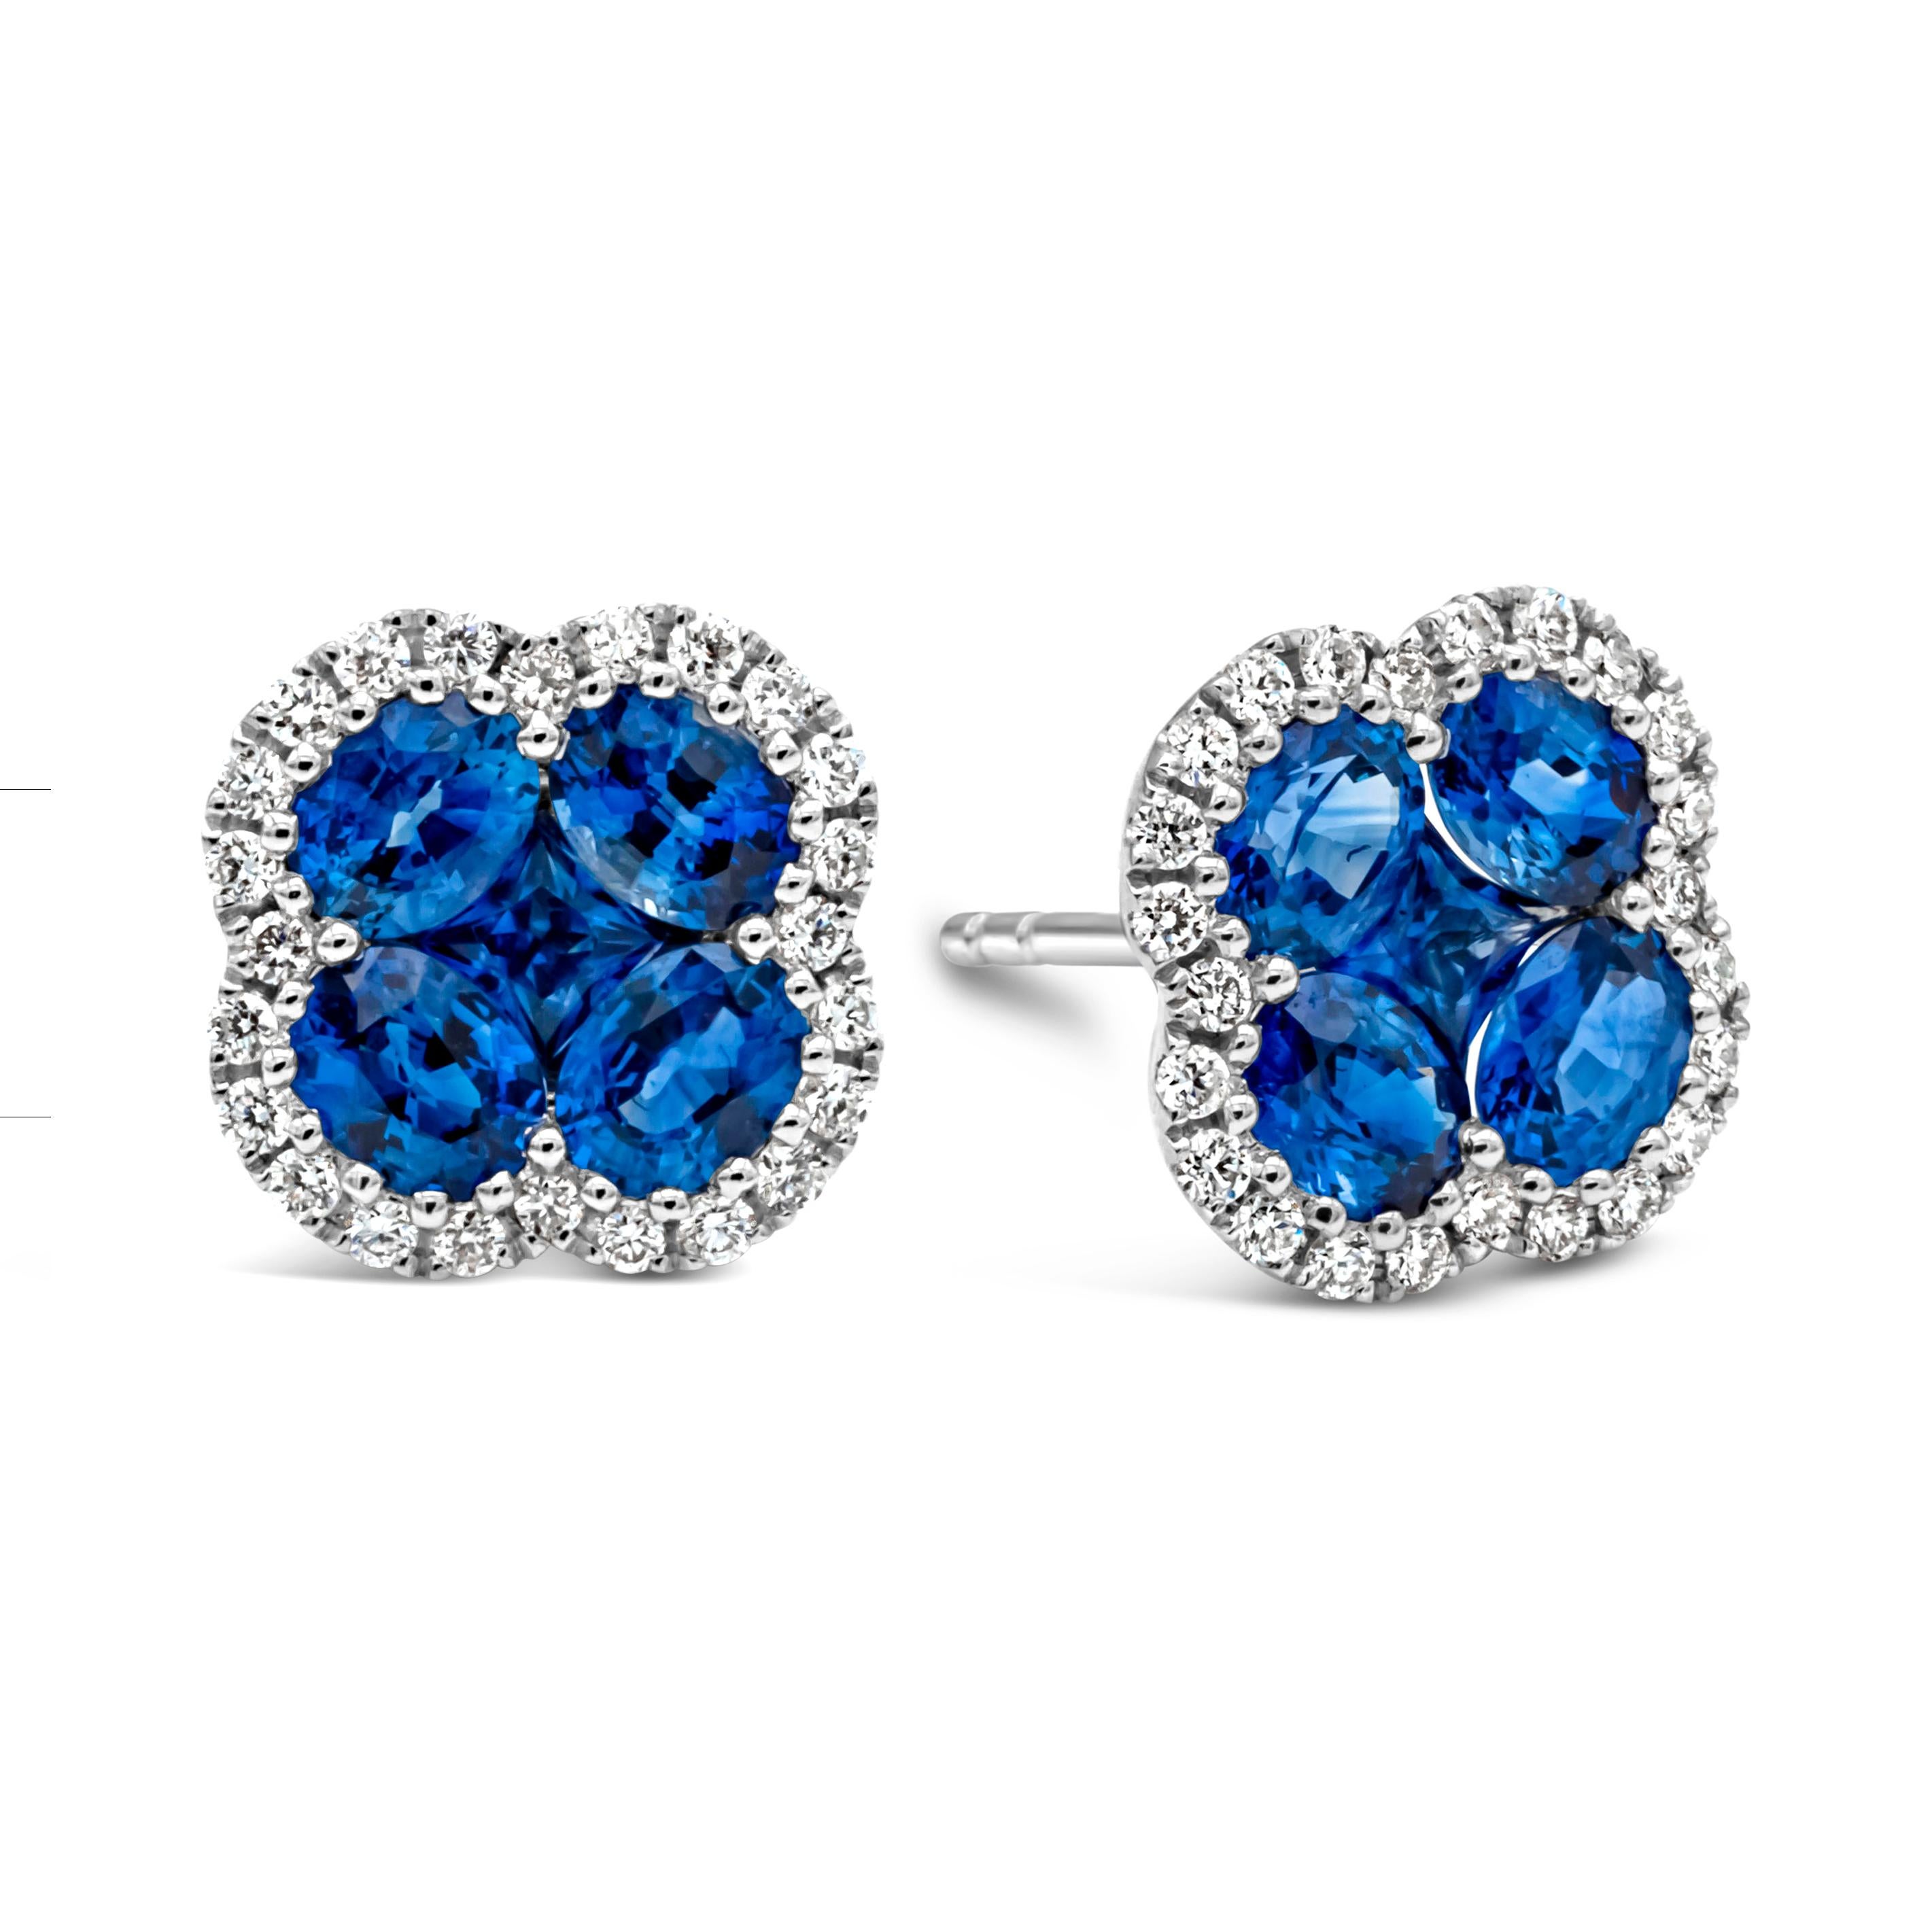 A simple and chic pair of stud earrings showcasing a cluster of oval and princess cut brilliant blue sapphires weighing 1.94 carats total, arranged in a beautiful clover design and shared prong setting. Surrounded by a single row of round brilliant